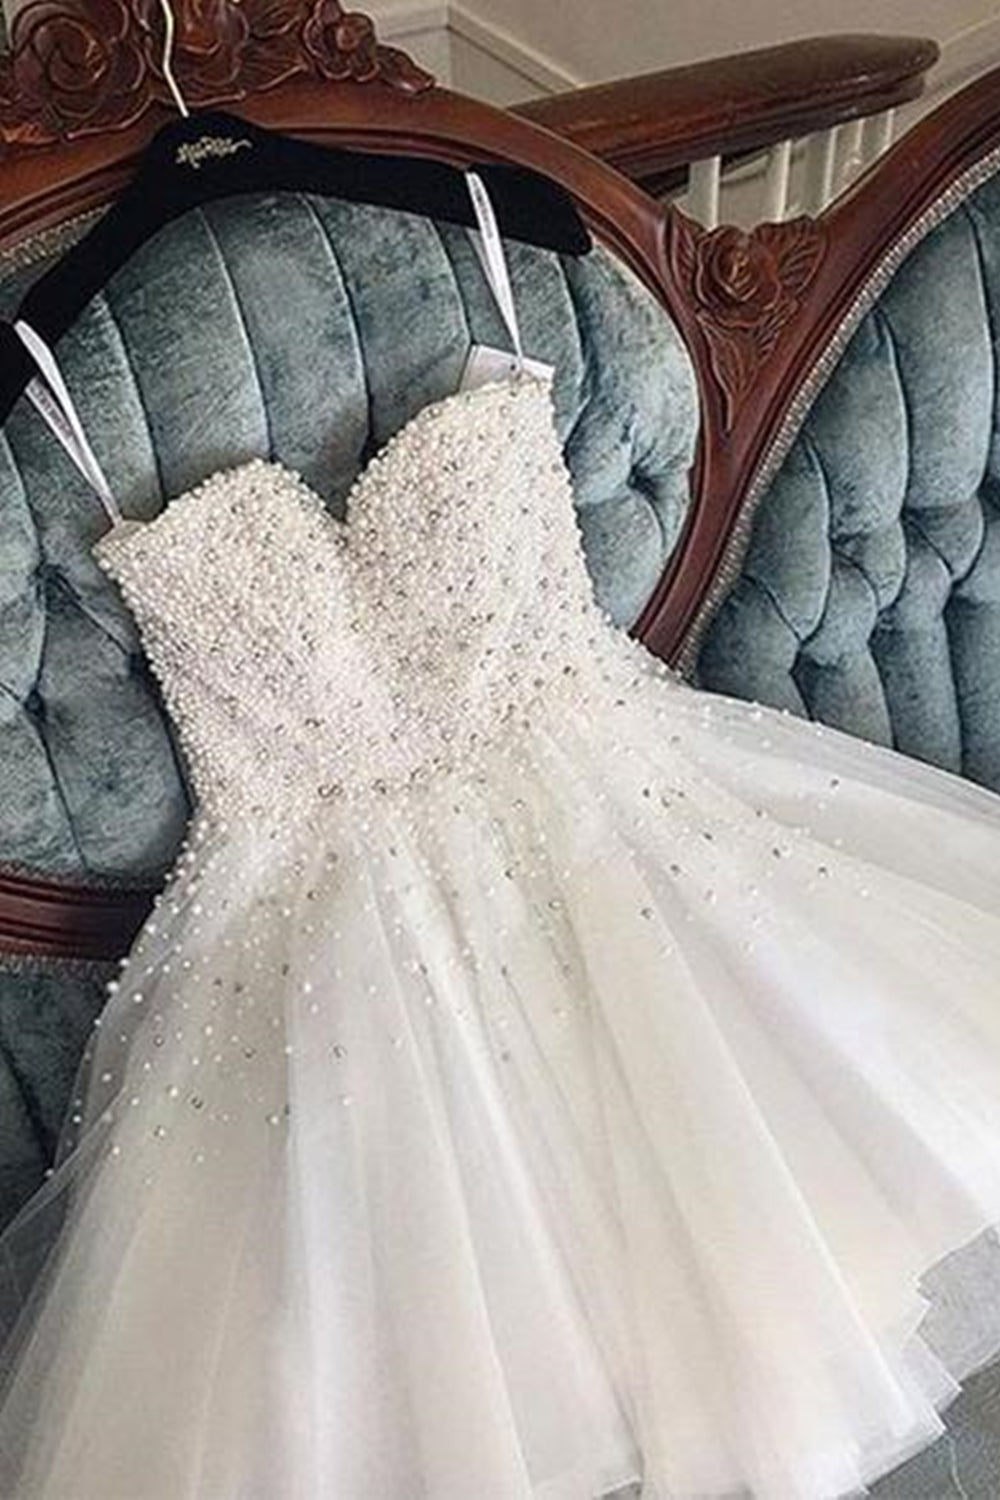 Gorgeous Sweetheart Neck Ivory Pearls Prom Homecoming Dresses, Ivory Beaded Short Formal Graduation Evening Dresses EP1447